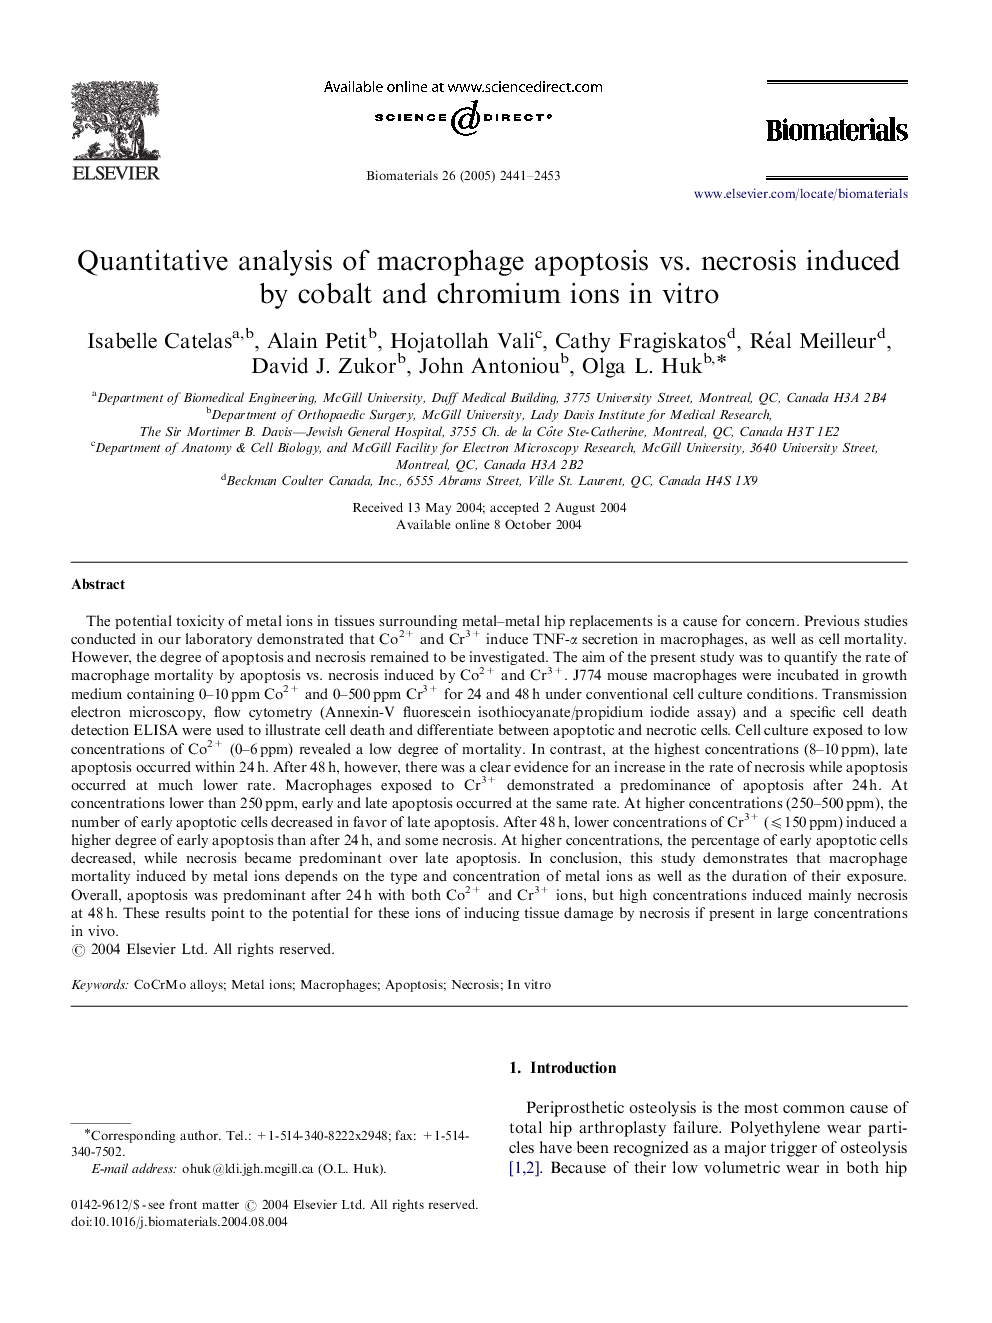 Quantitative analysis of macrophage apoptosis vs. necrosis induced by cobalt and chromium ions in vitro